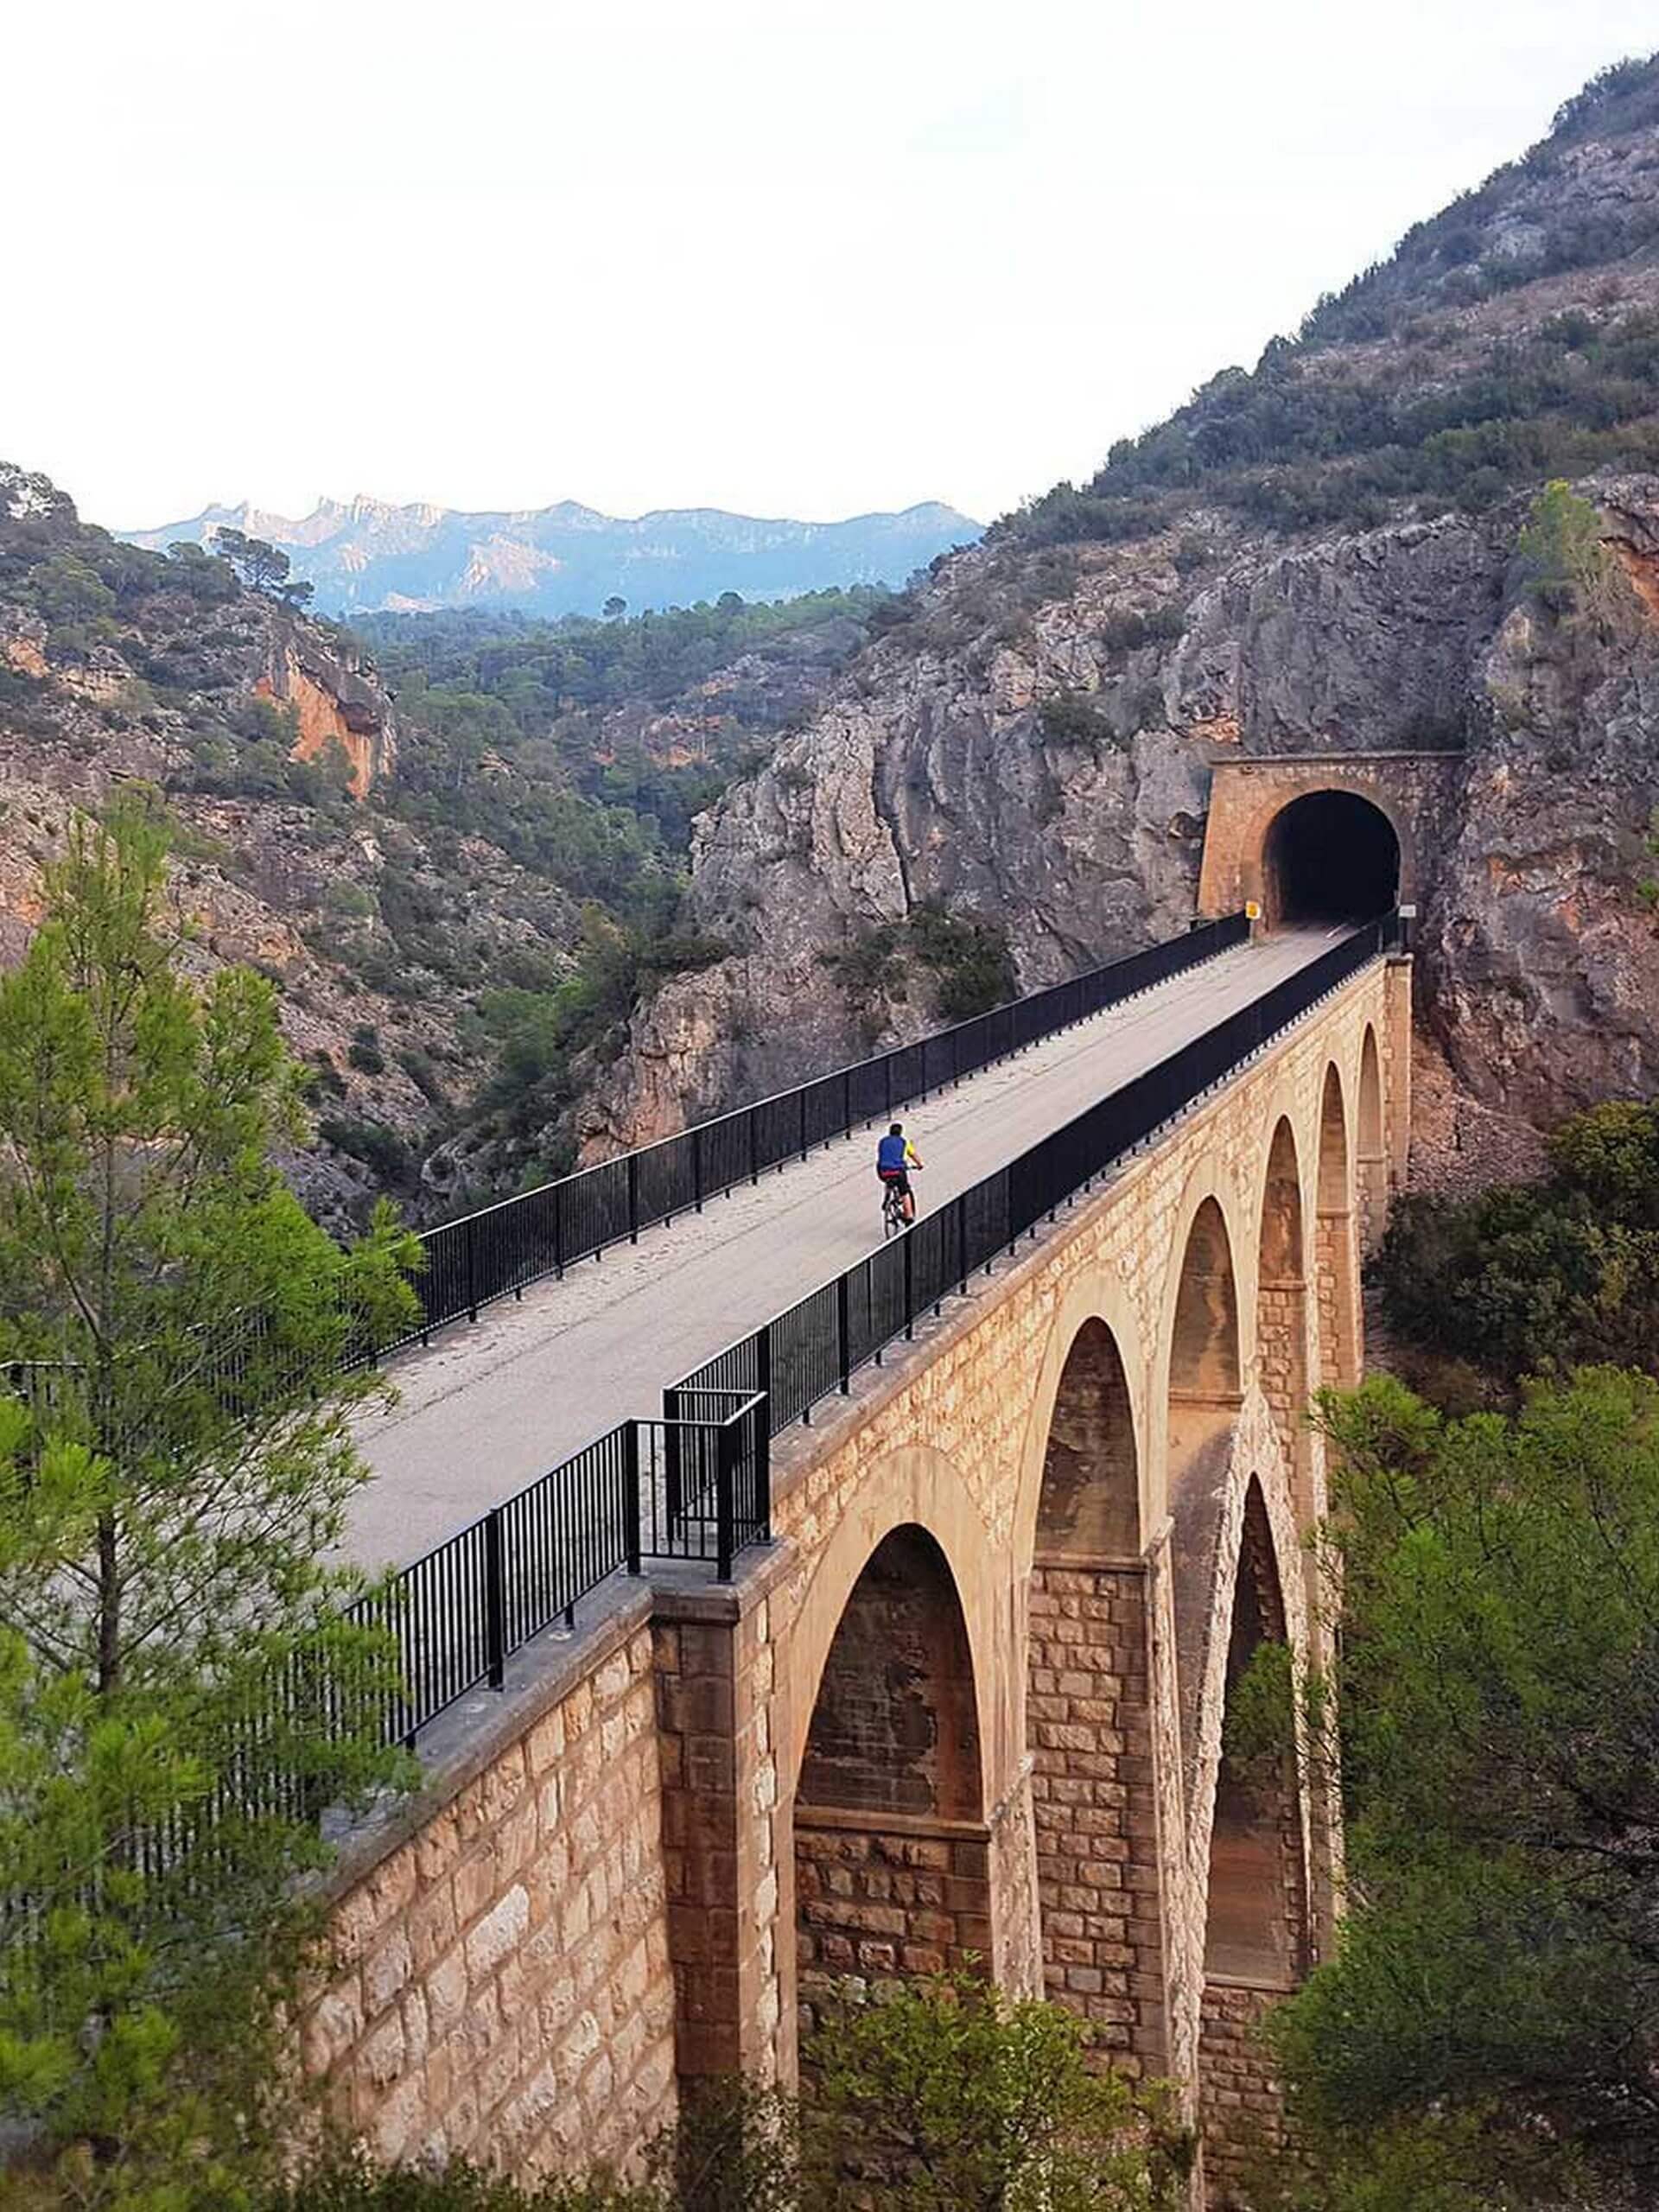 Rocky bridge and the tunnel in Spain